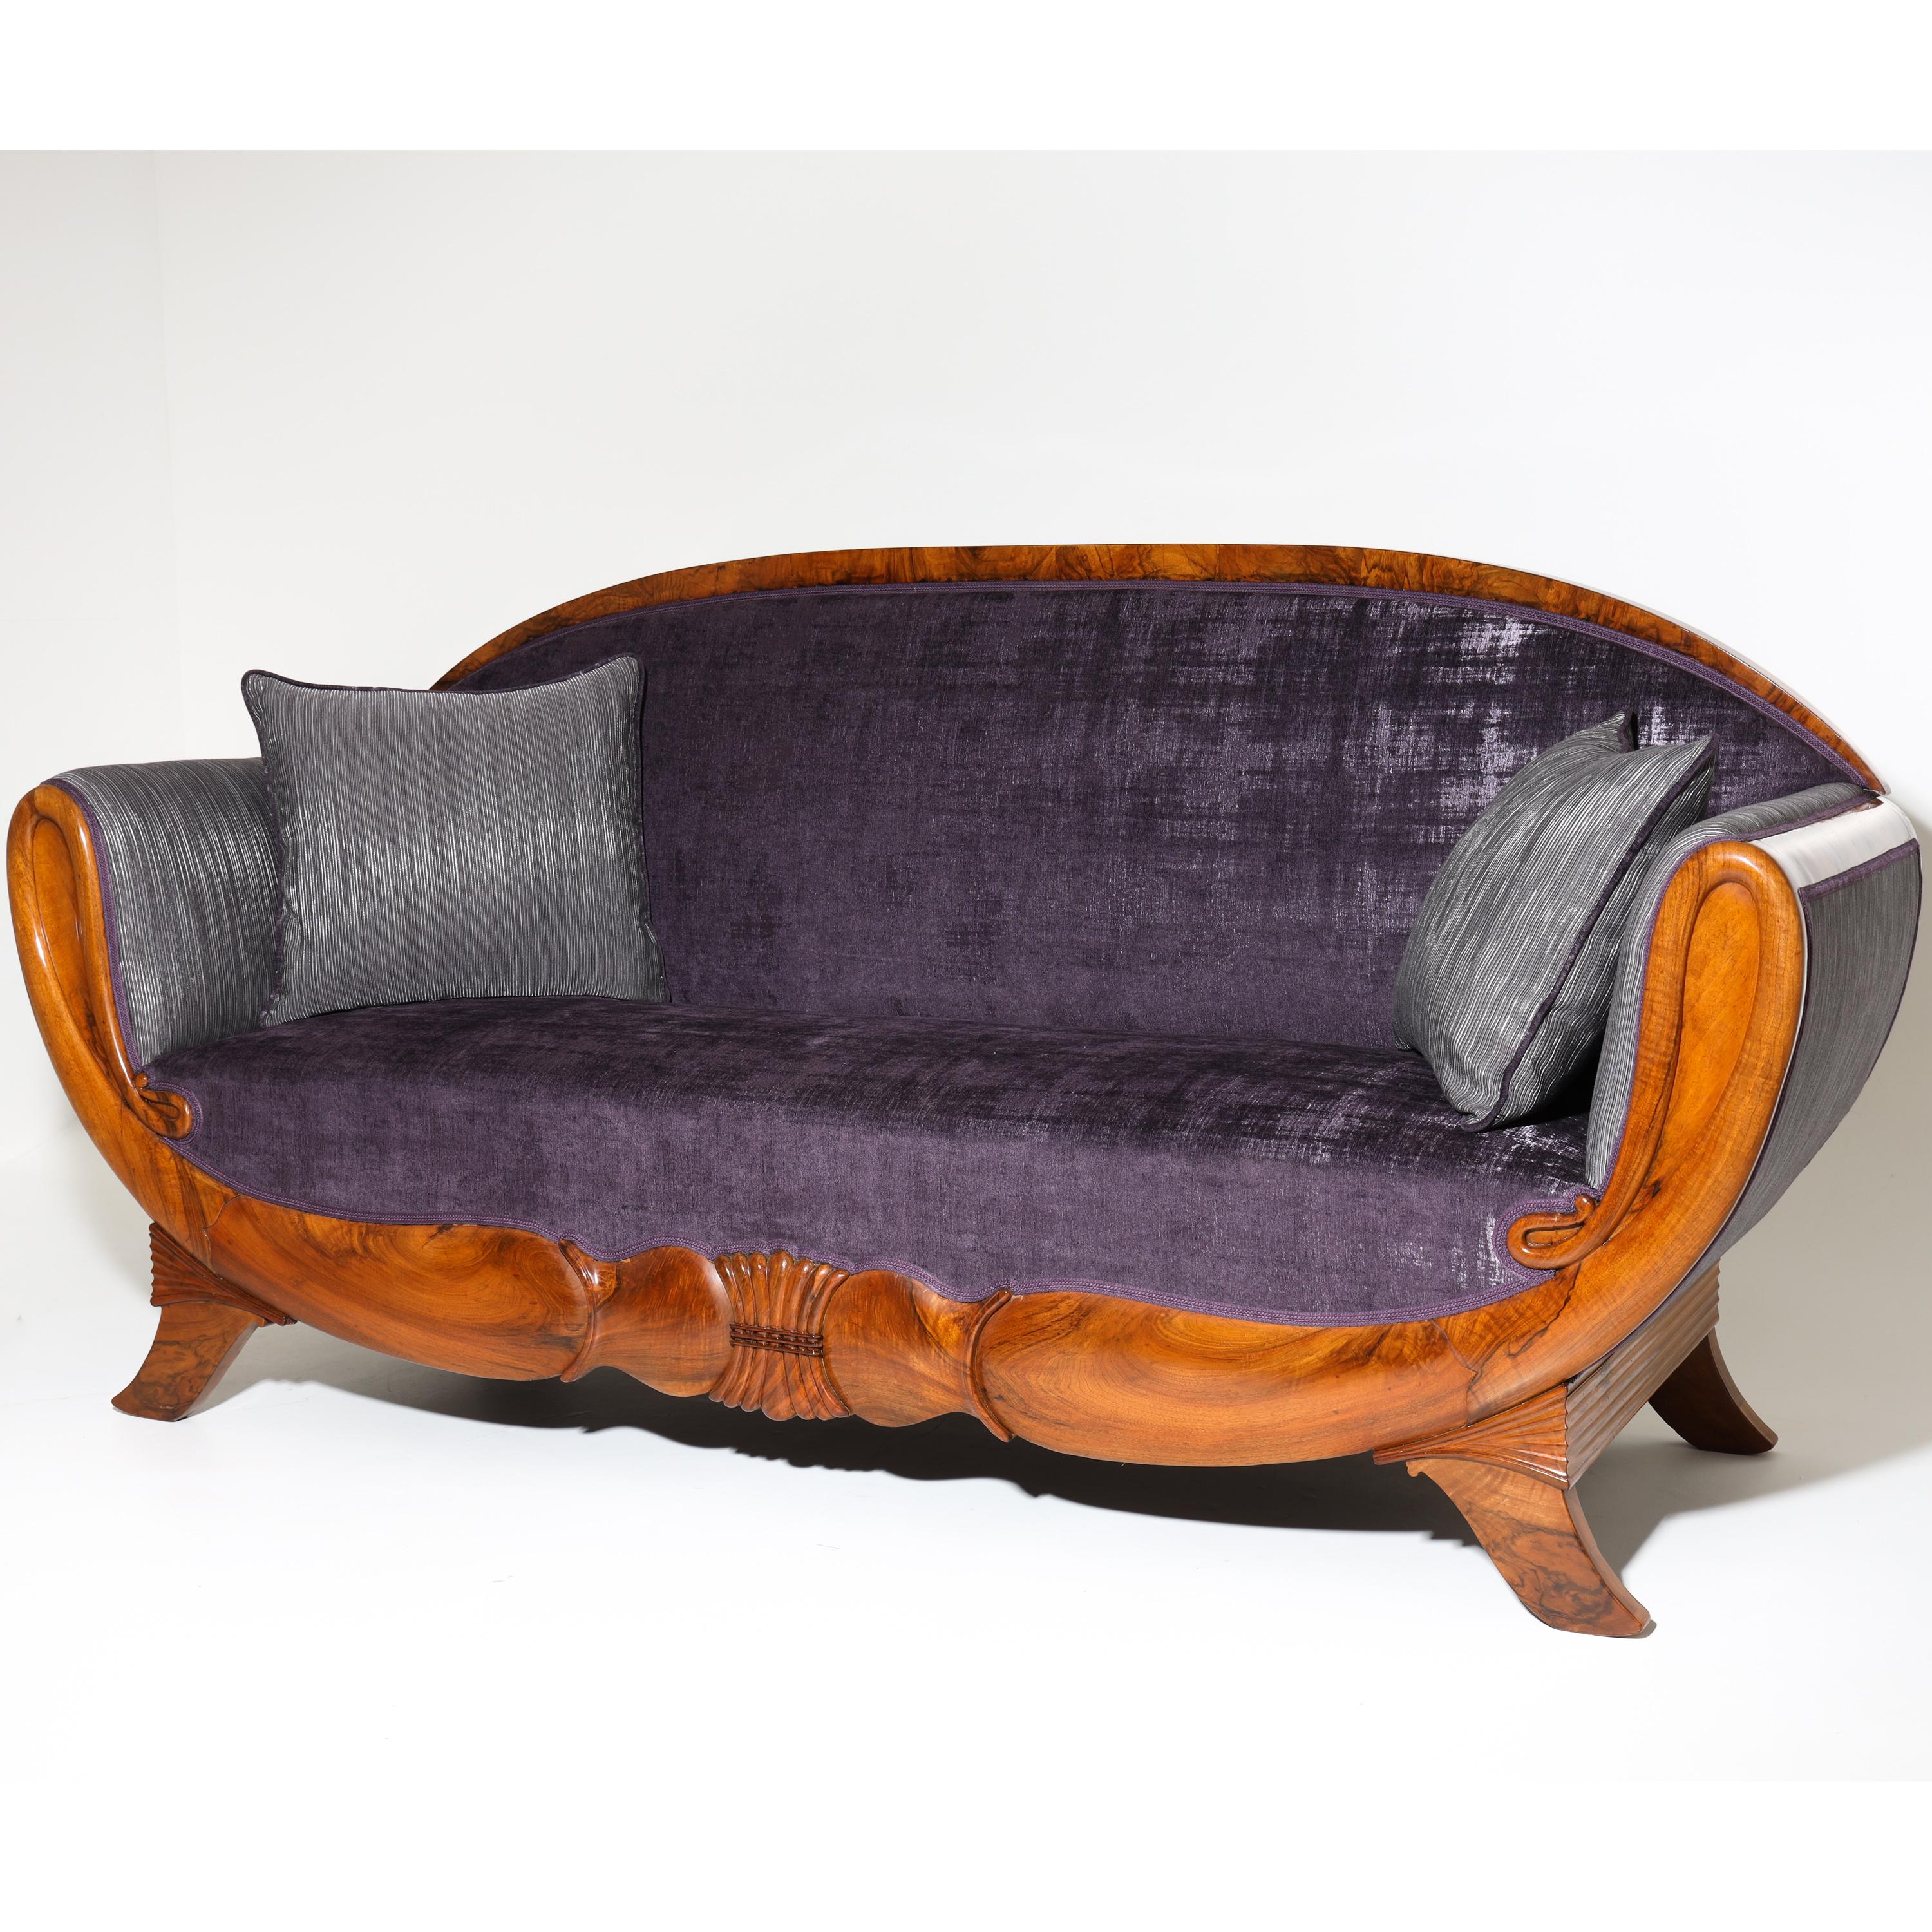 Biedermeier sofa in the style of Klussmann, in walnut, standing on flared legs with an arched carved frame and rounded backrest. The backrest and seat are covered with a high-quality violet fabric, the armrests are covered with a striped fabric on